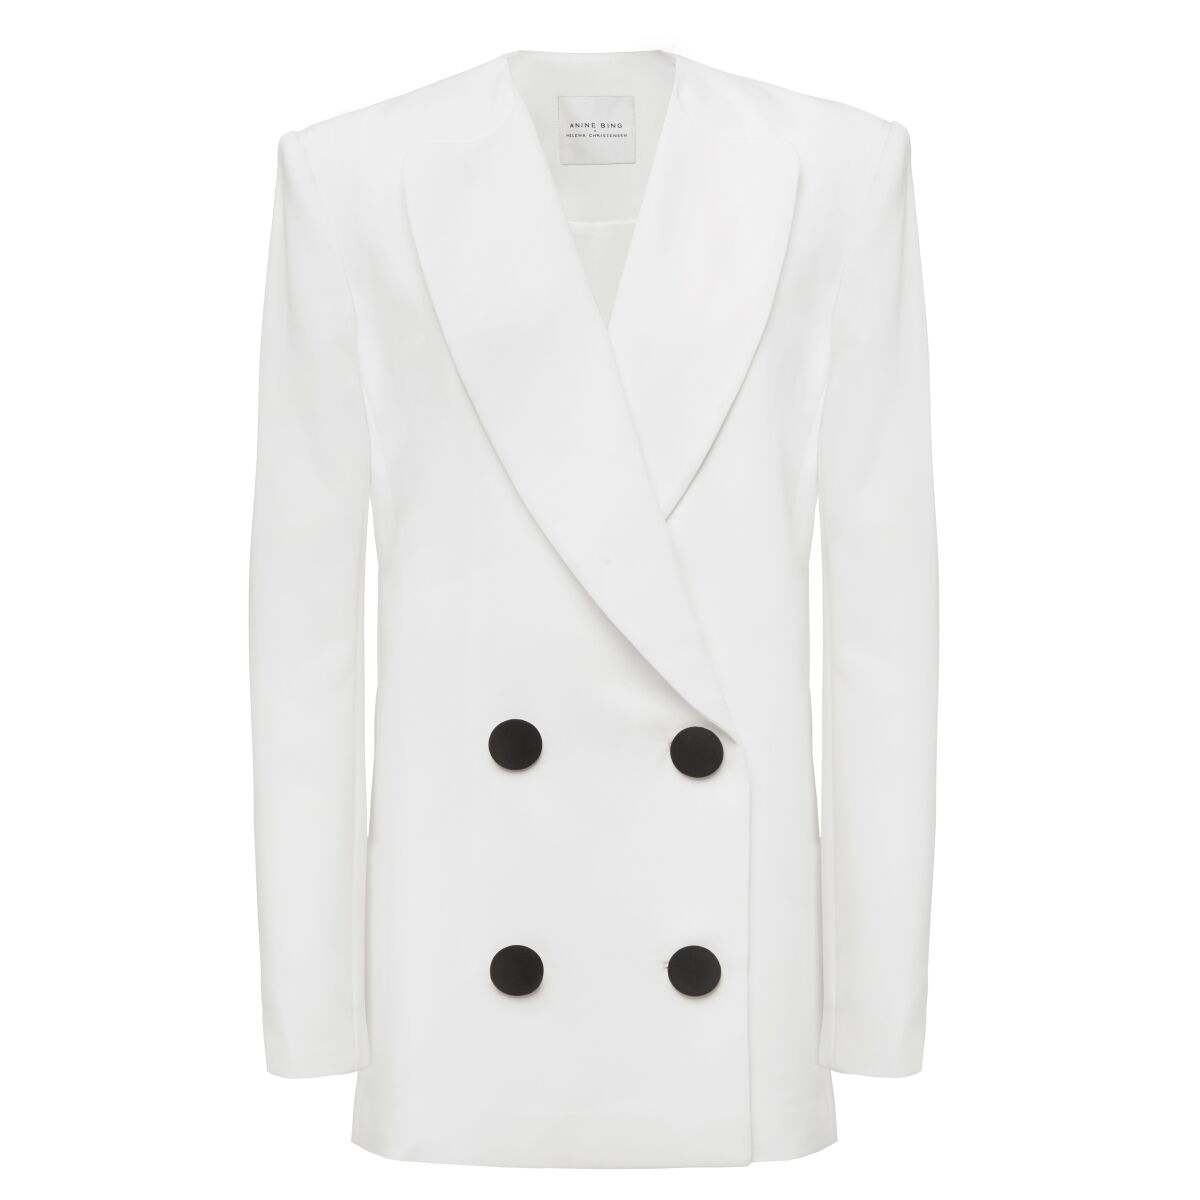  Anine Bing X Helena Christensen's limited-edition white Claudia blazer with large black buttons.